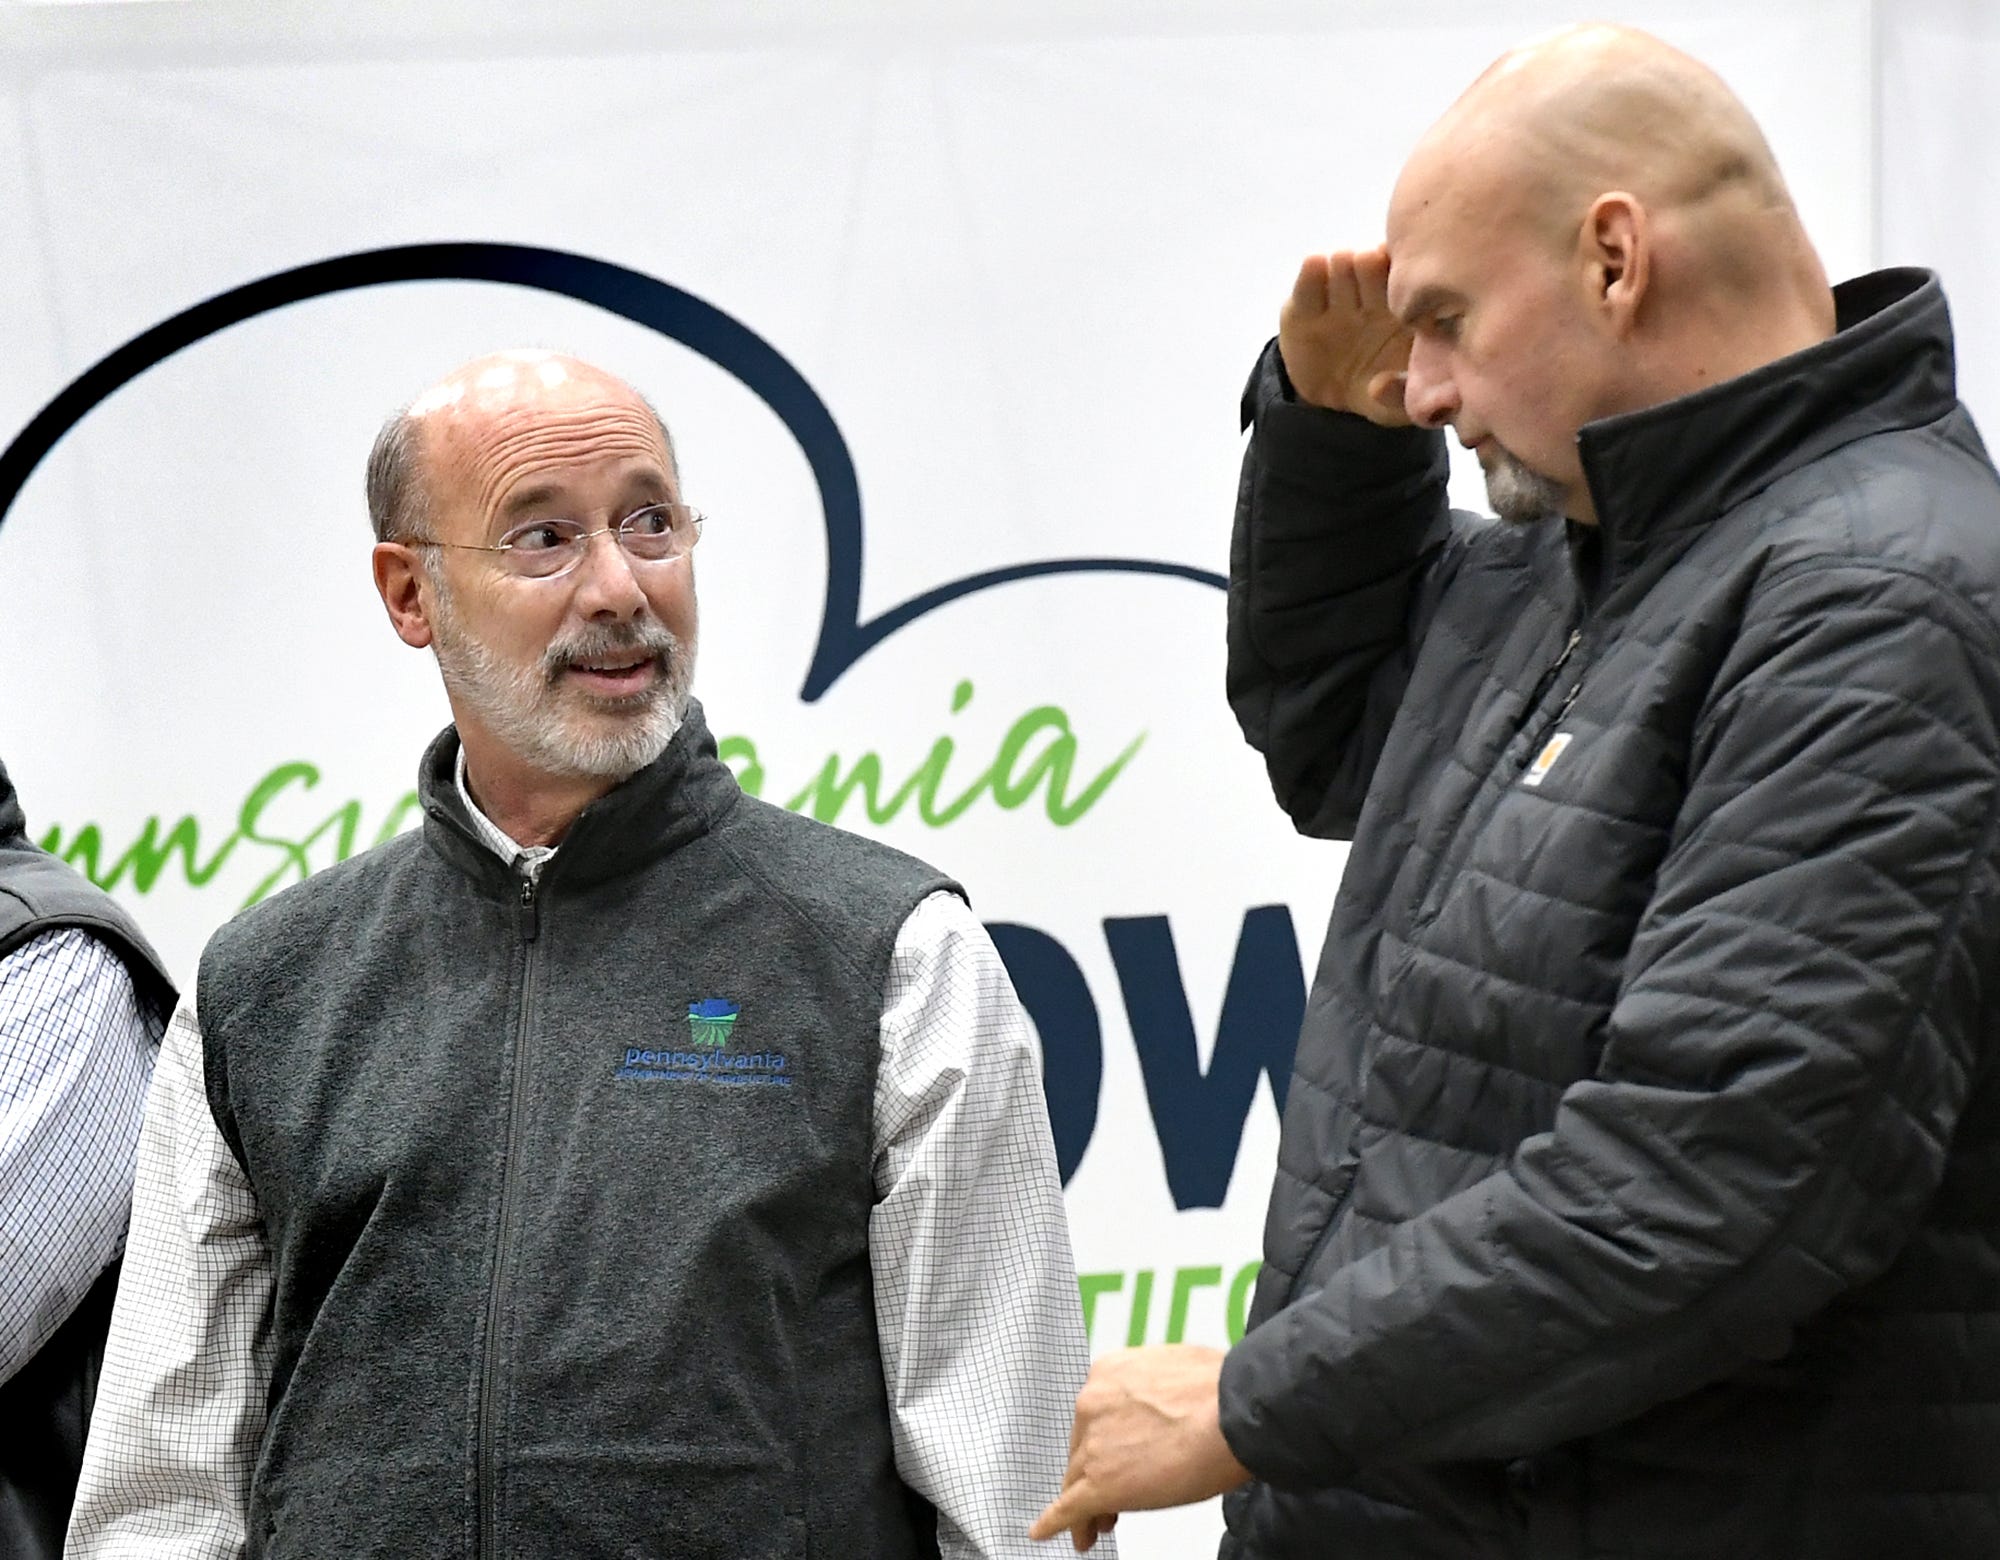 Lt. Gov. John Fetterman salutes Gov. Tom Wolf as Wolf was introduced during opening ceremonies at the 104th Pennsylvania Farm Show Saturday, Jan. 4, 2020. Saturday was the first day of the week-long farm show. Bill Kalina photo